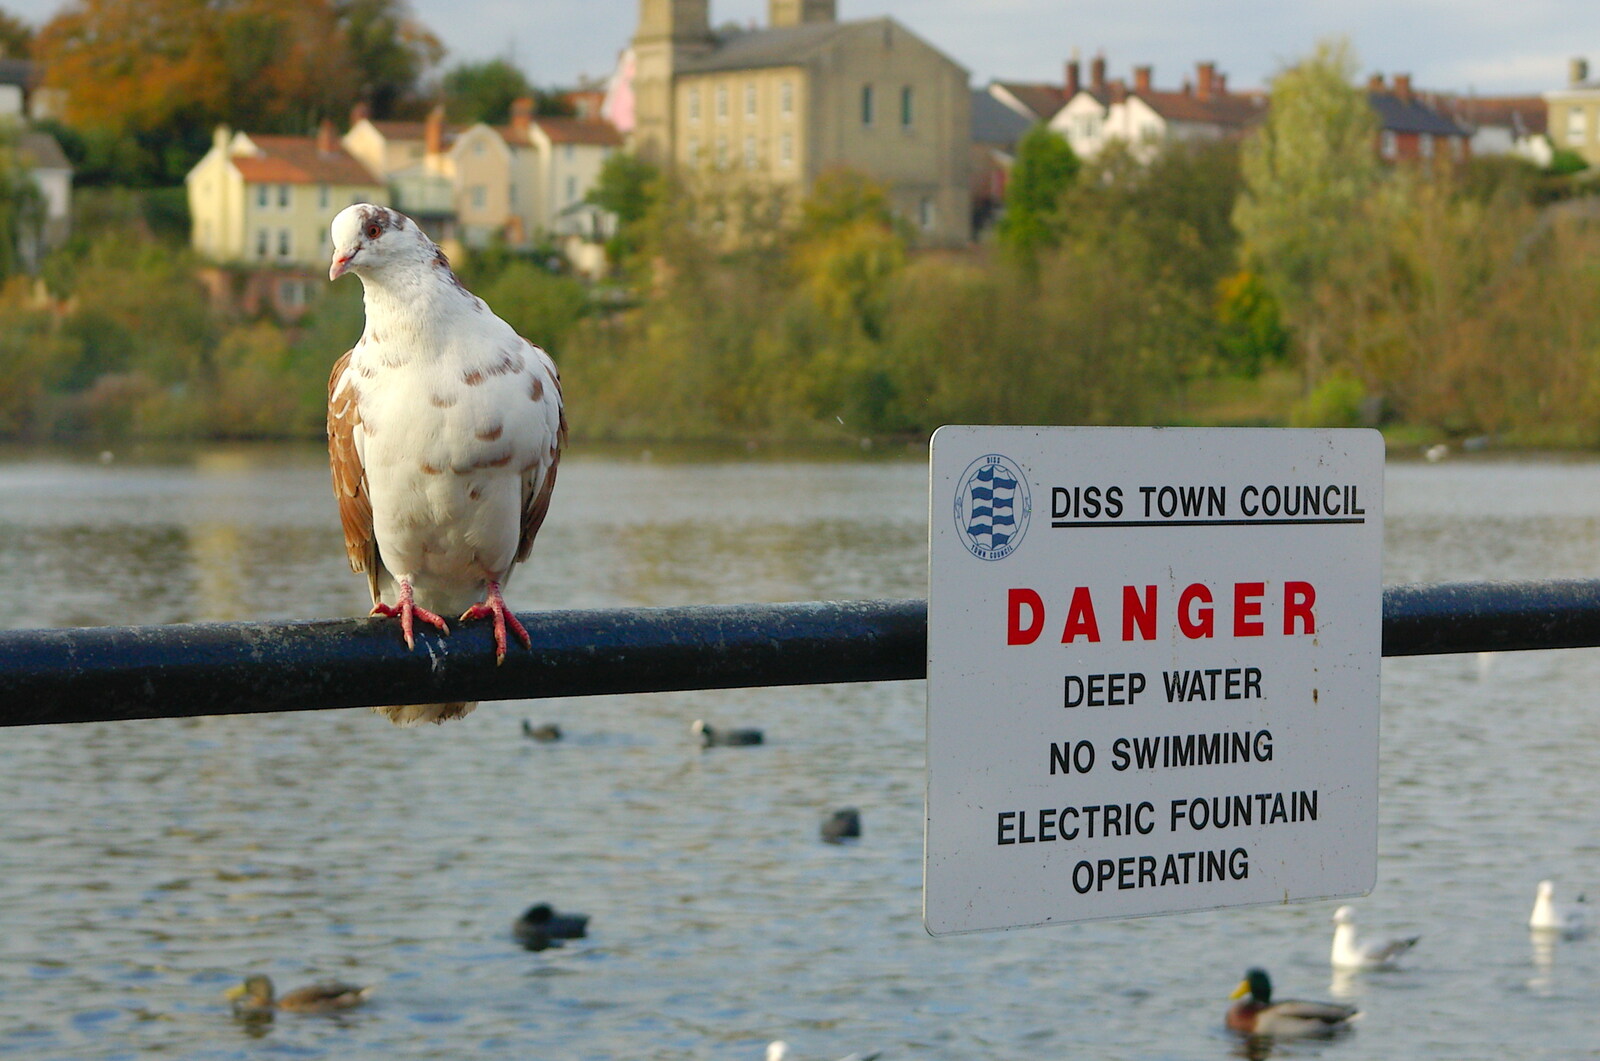 Danger: pigeon from Burnt-out Recycling Bins and Fireworks from a Distance, Diss, Norfolk - 4th November 2005